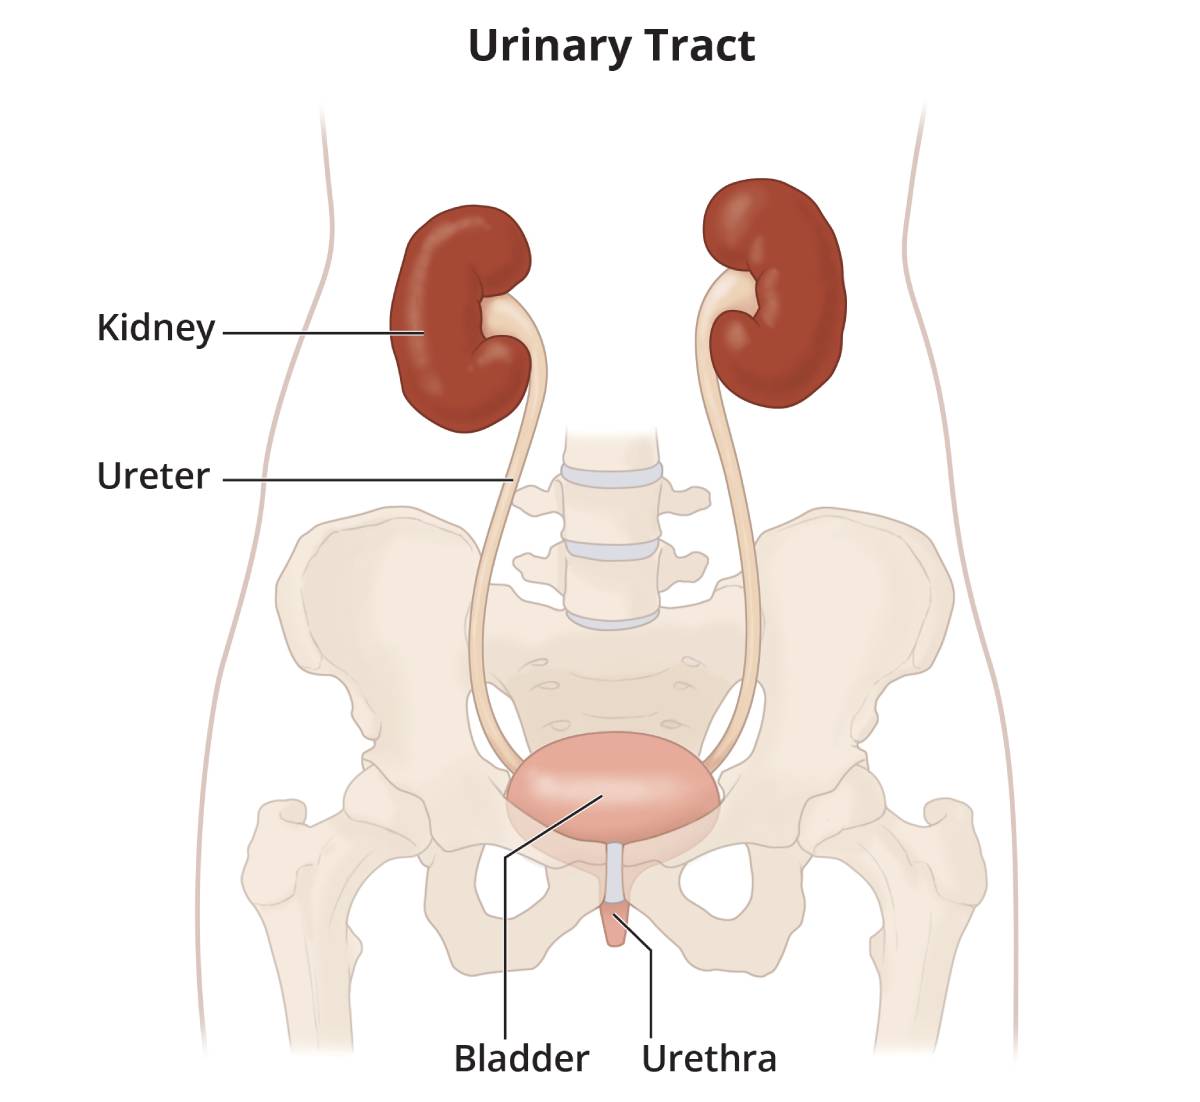 A urinary tract with labels for kidney, ureter, bladder, and urethra.